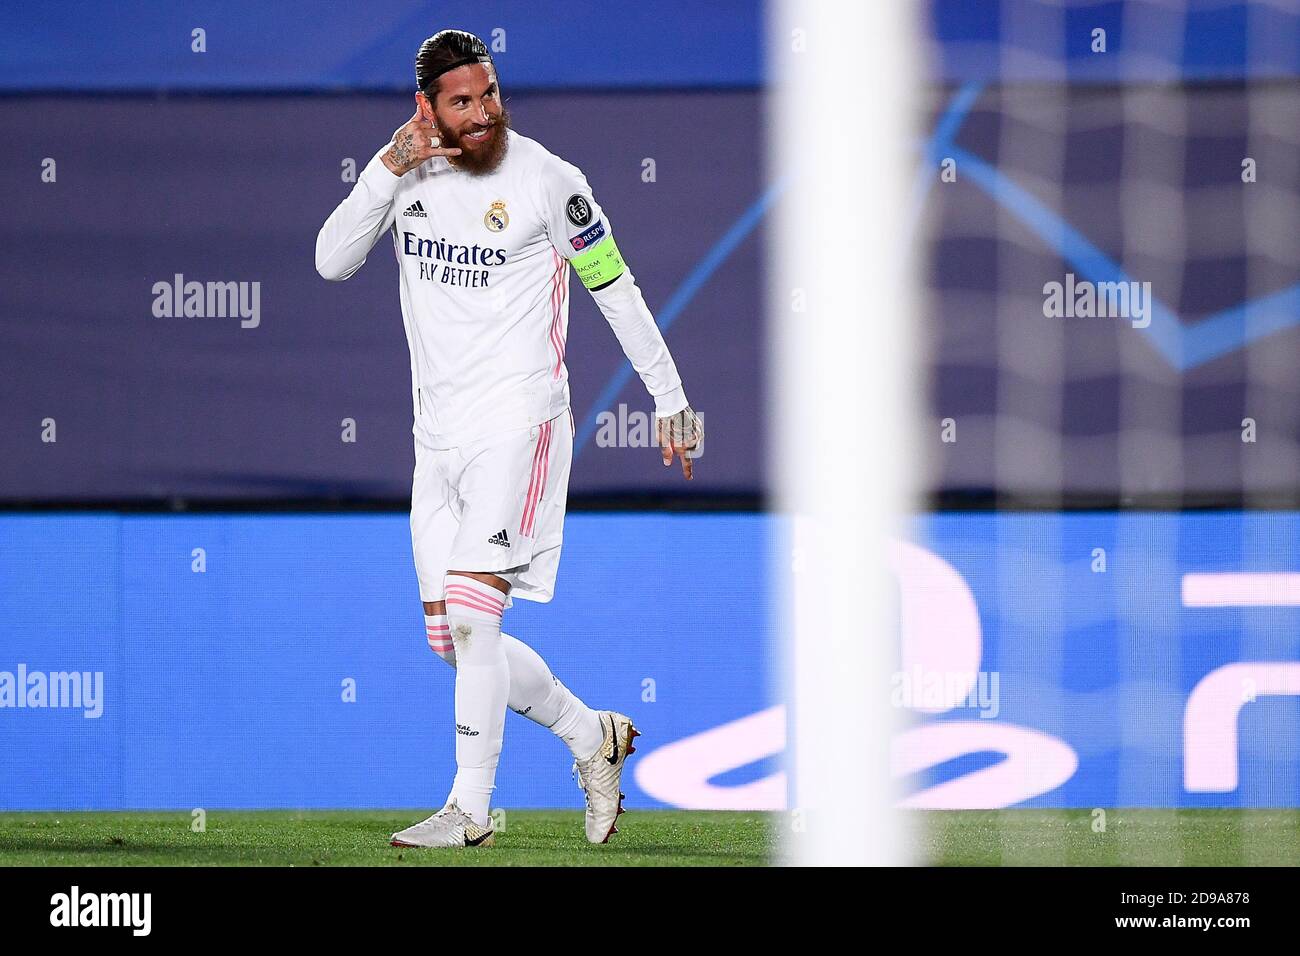 Madrid, Spain - 03 November, 2020: Sergio Ramos of Real Madrid CF celebrates after scoring his 100th goal for Real Madrid CF during the Champions League Group B football match between Real Madrid CF and FC Internazionale. Real Madrid CF won 3-2 over FC Internazionale. Credit: Nicolò Campo/Alamy Live News Stock Photo